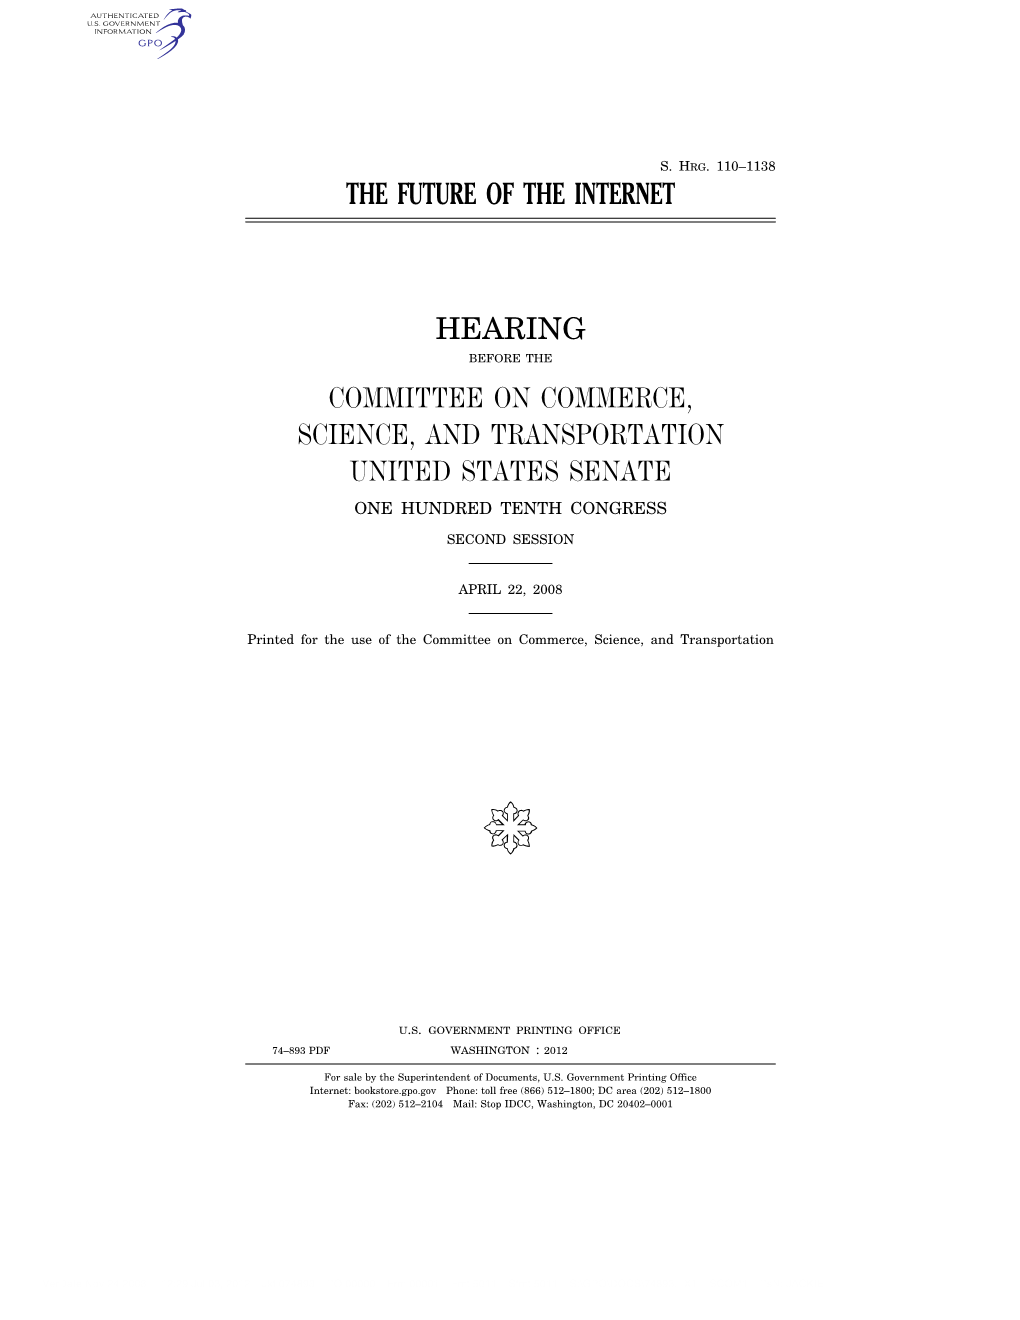 The Future of the Internet Hearing Committee On